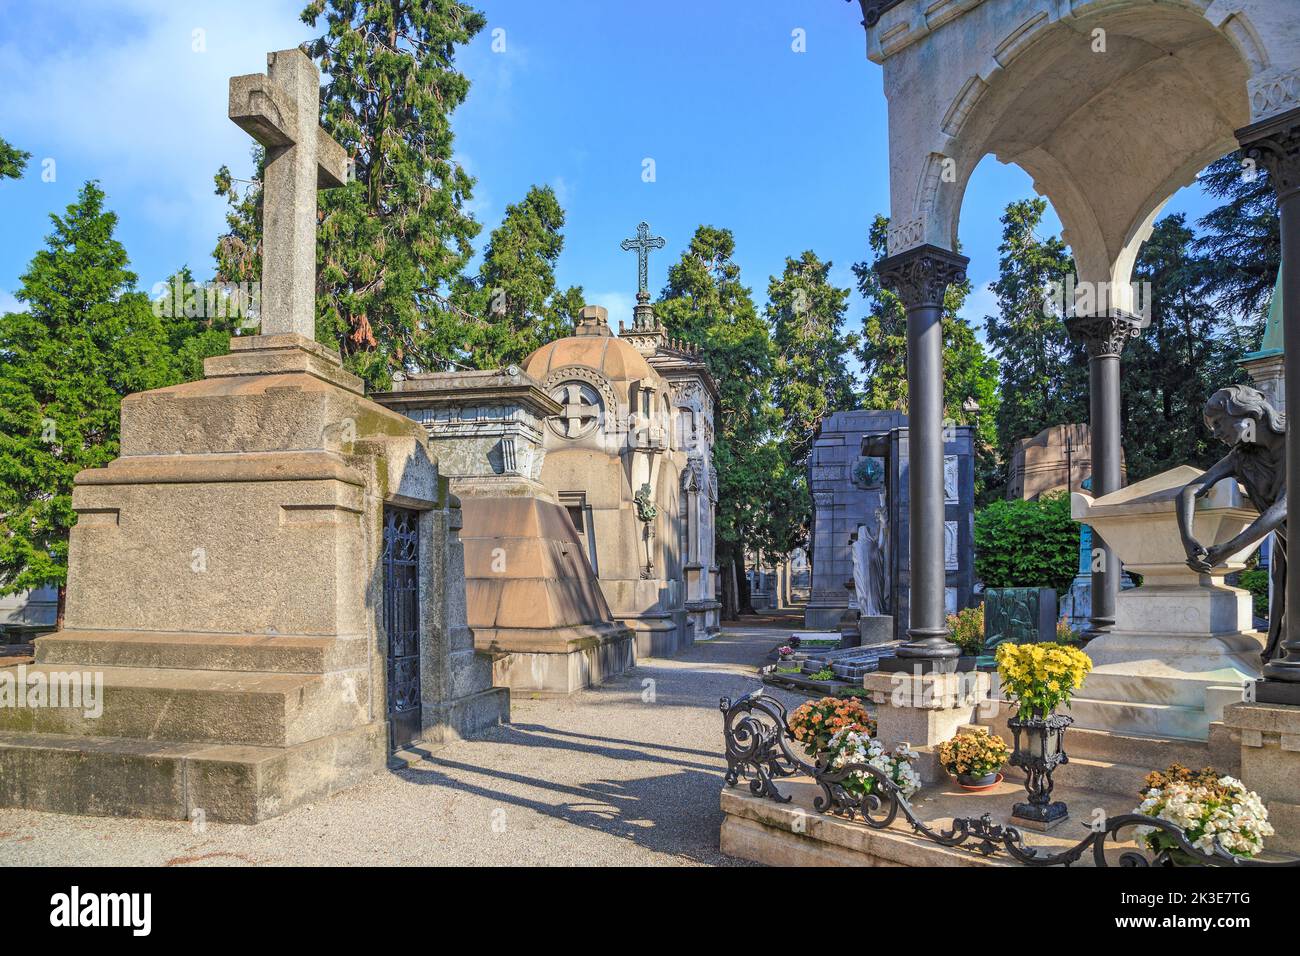 MILAN, ITALY - MAY 17, 2018: This is one of the alleys on the Monumental Cemetery, which is considered one of the richest tombstones and monuments in Stock Photo